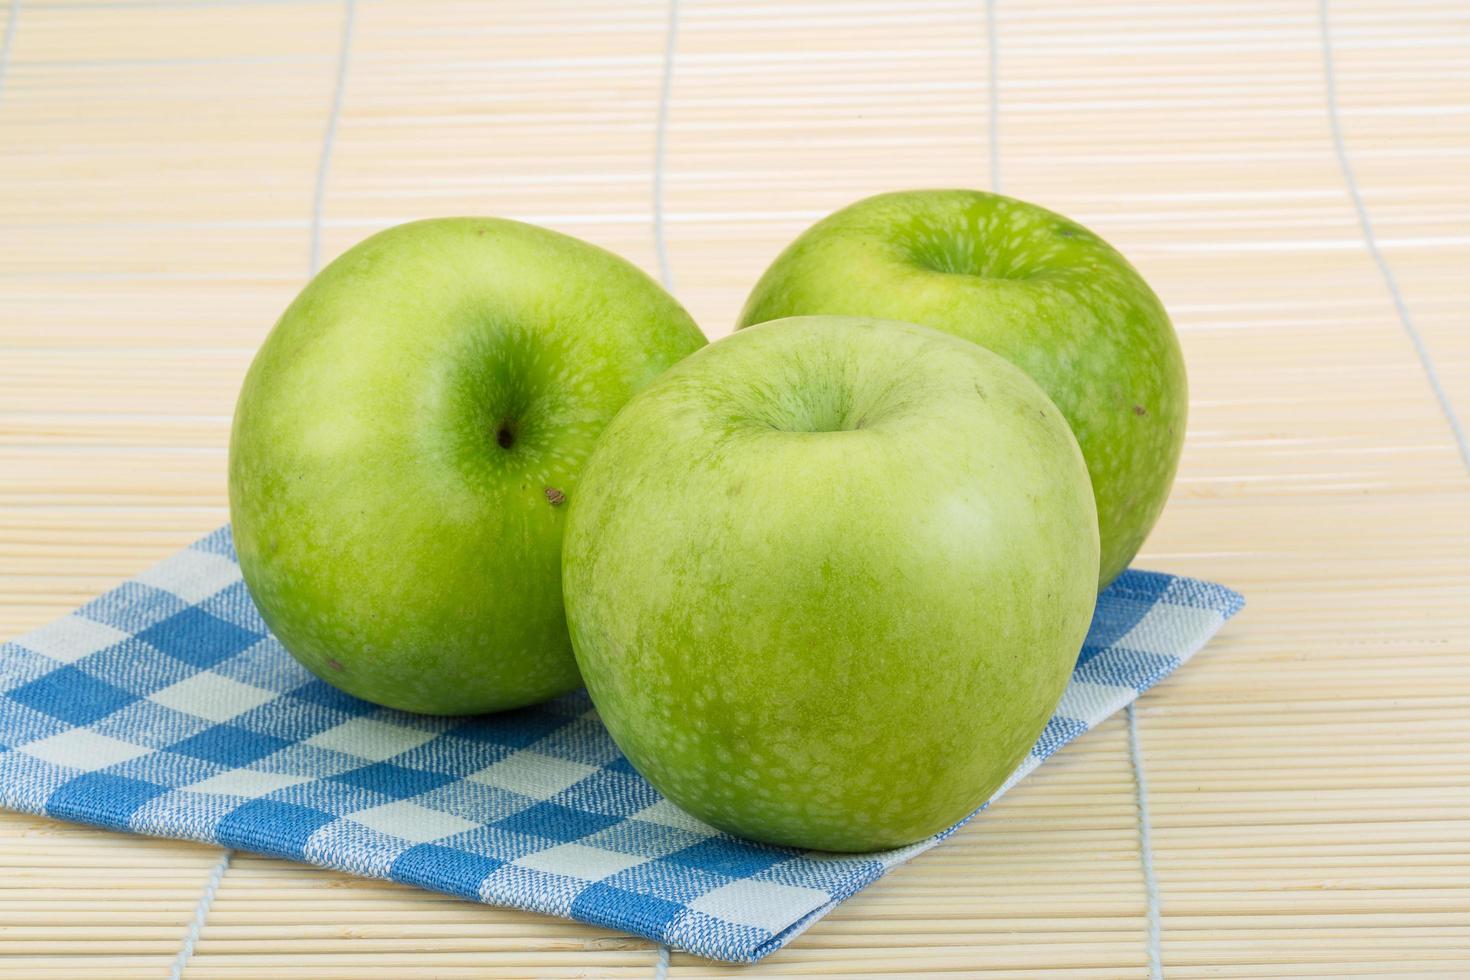 Green apple on wooden background photo